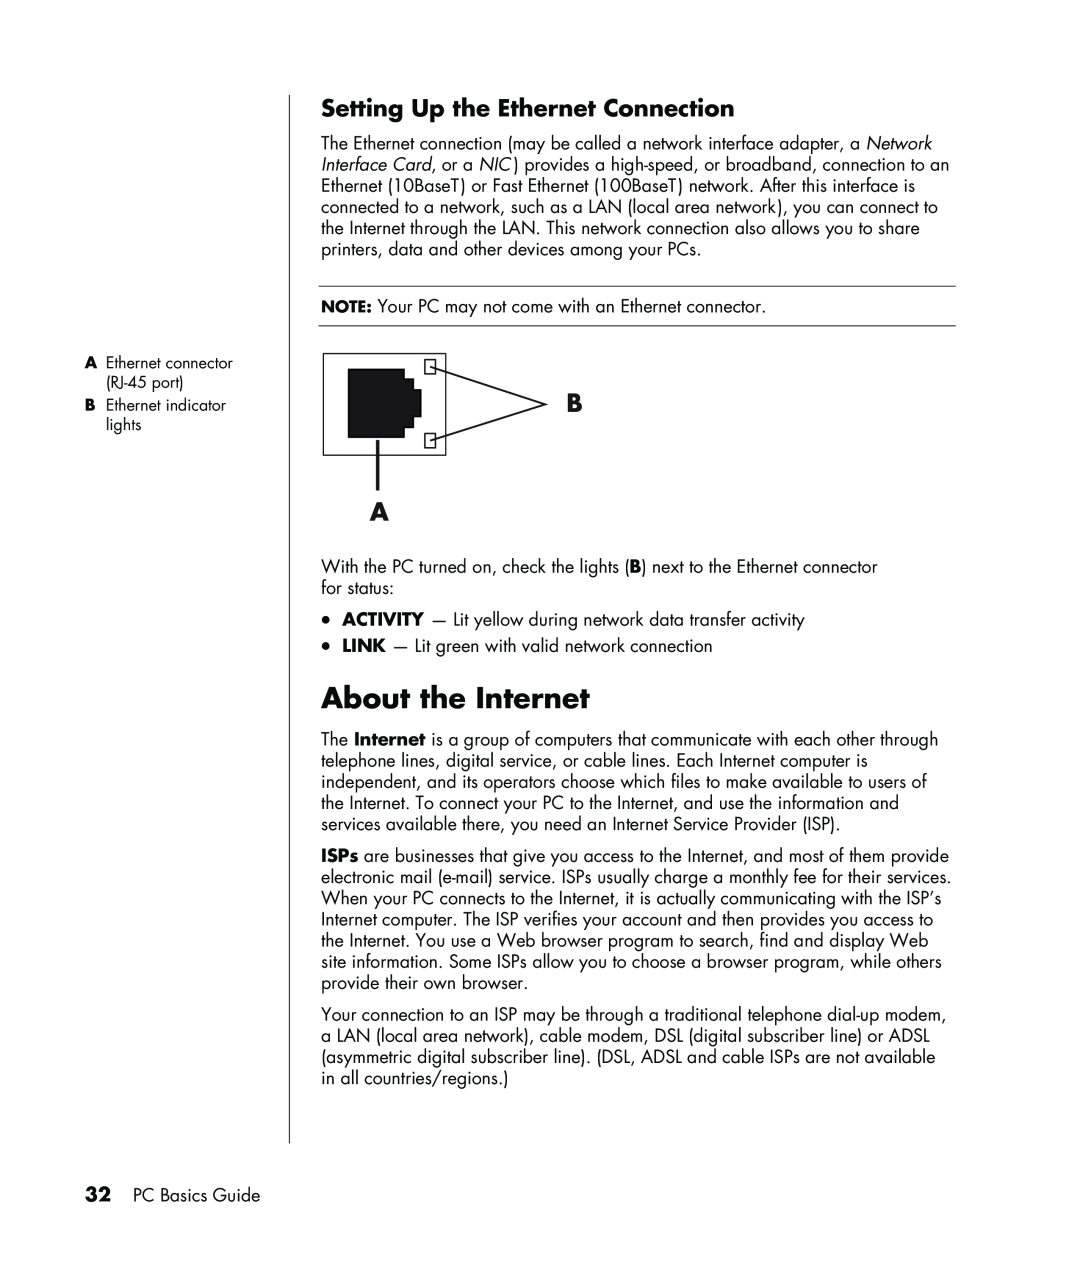 HP m7181.uk, a1005.uk, a1029.uk, SR1420UK, SR1460UK, SR1440UK manual About the Internet, Setting Up the Ethernet Connection 